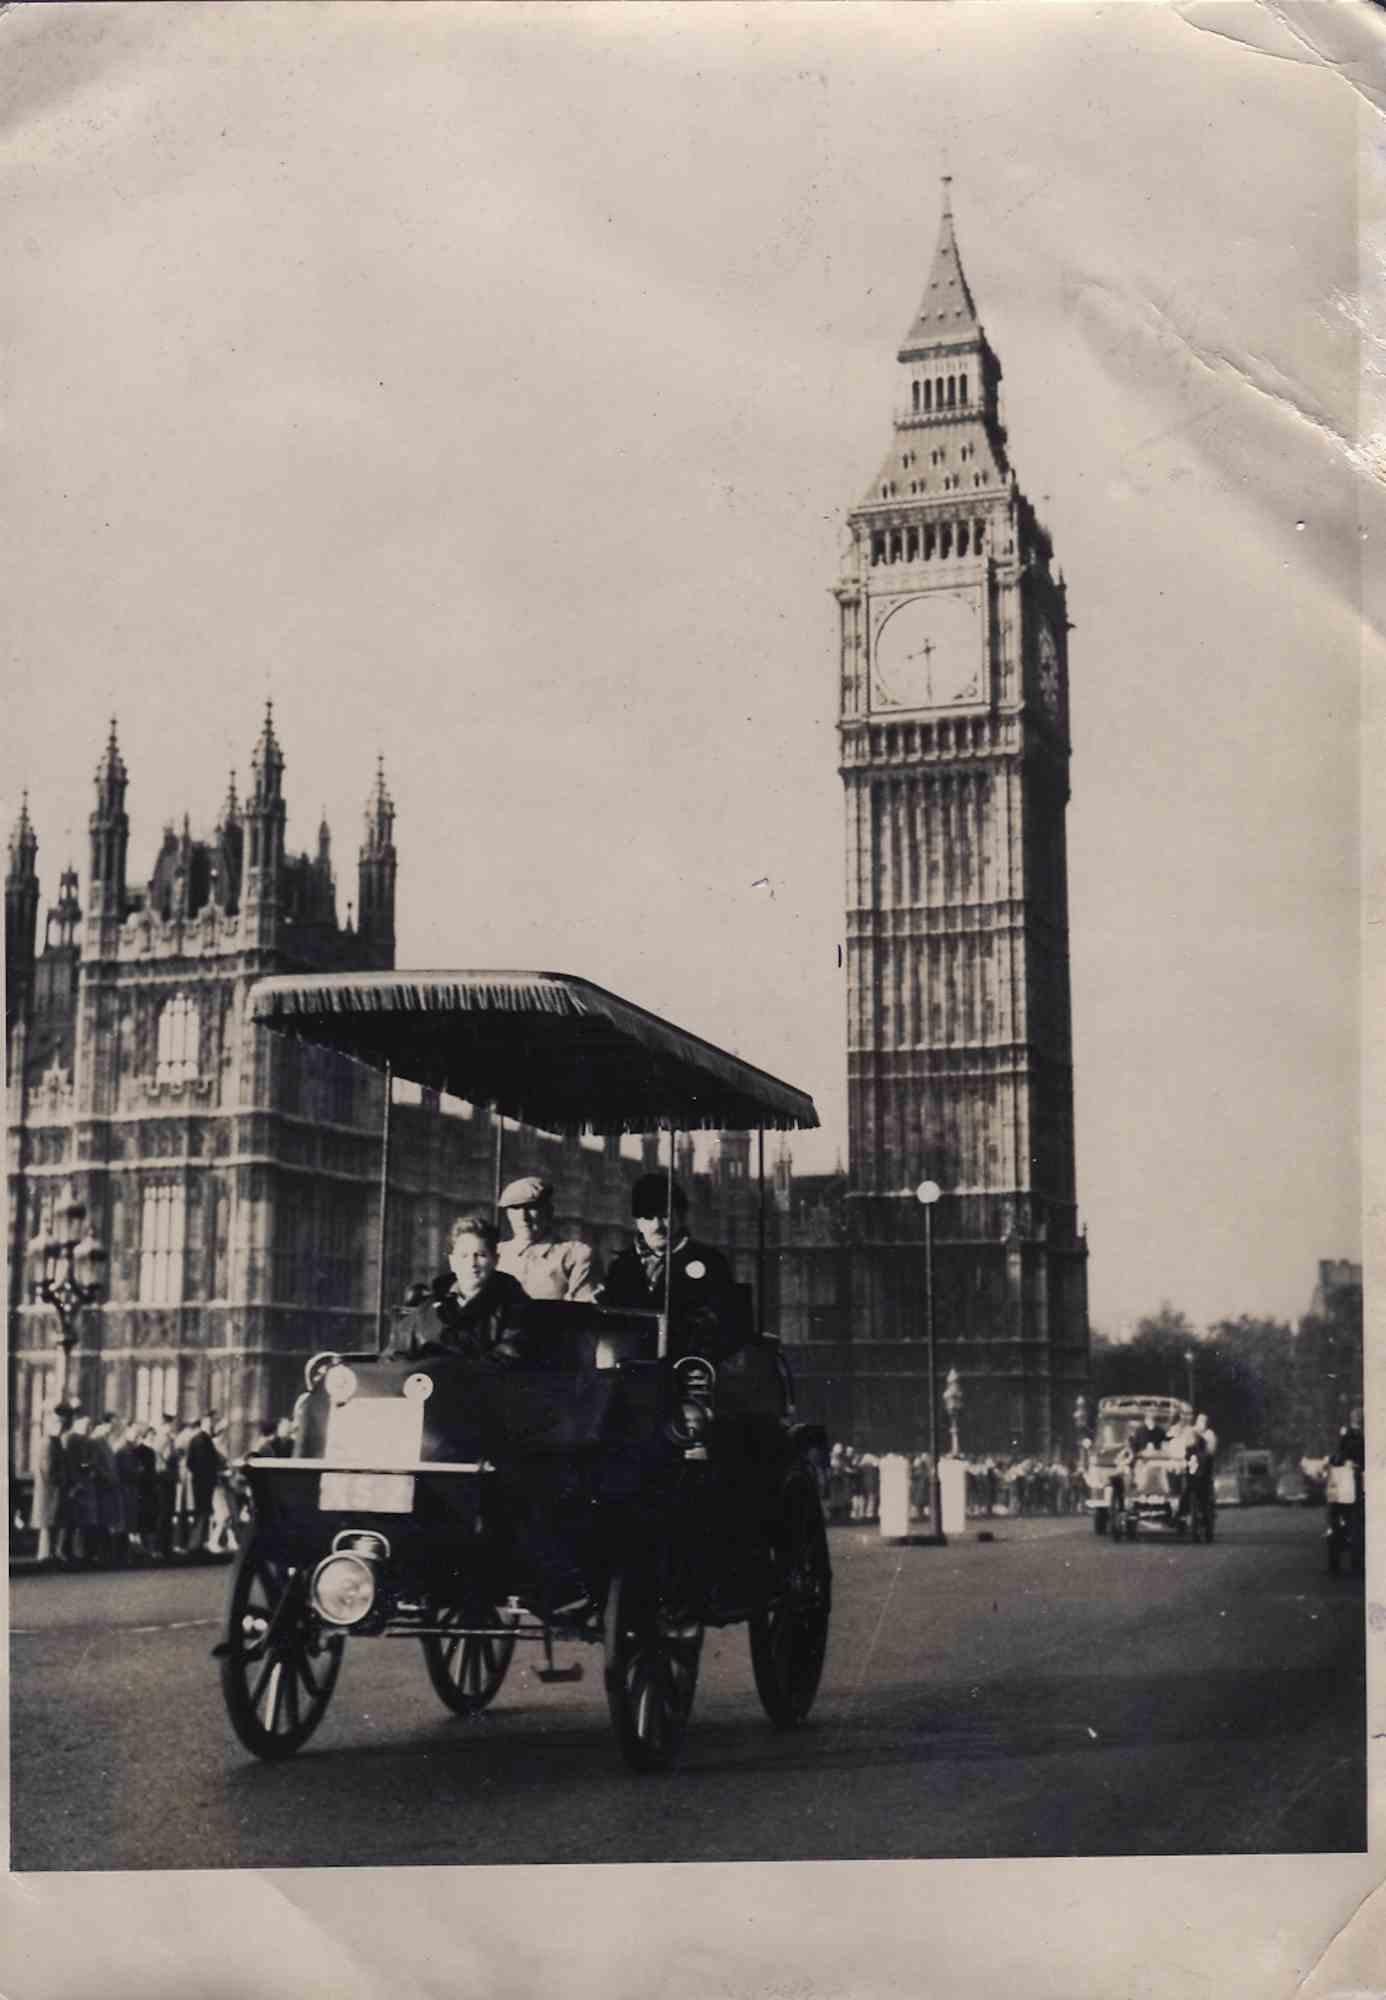 Unknown Figurative Photograph - Historical Photo - London With Arrol Johnston - Early 20th Century